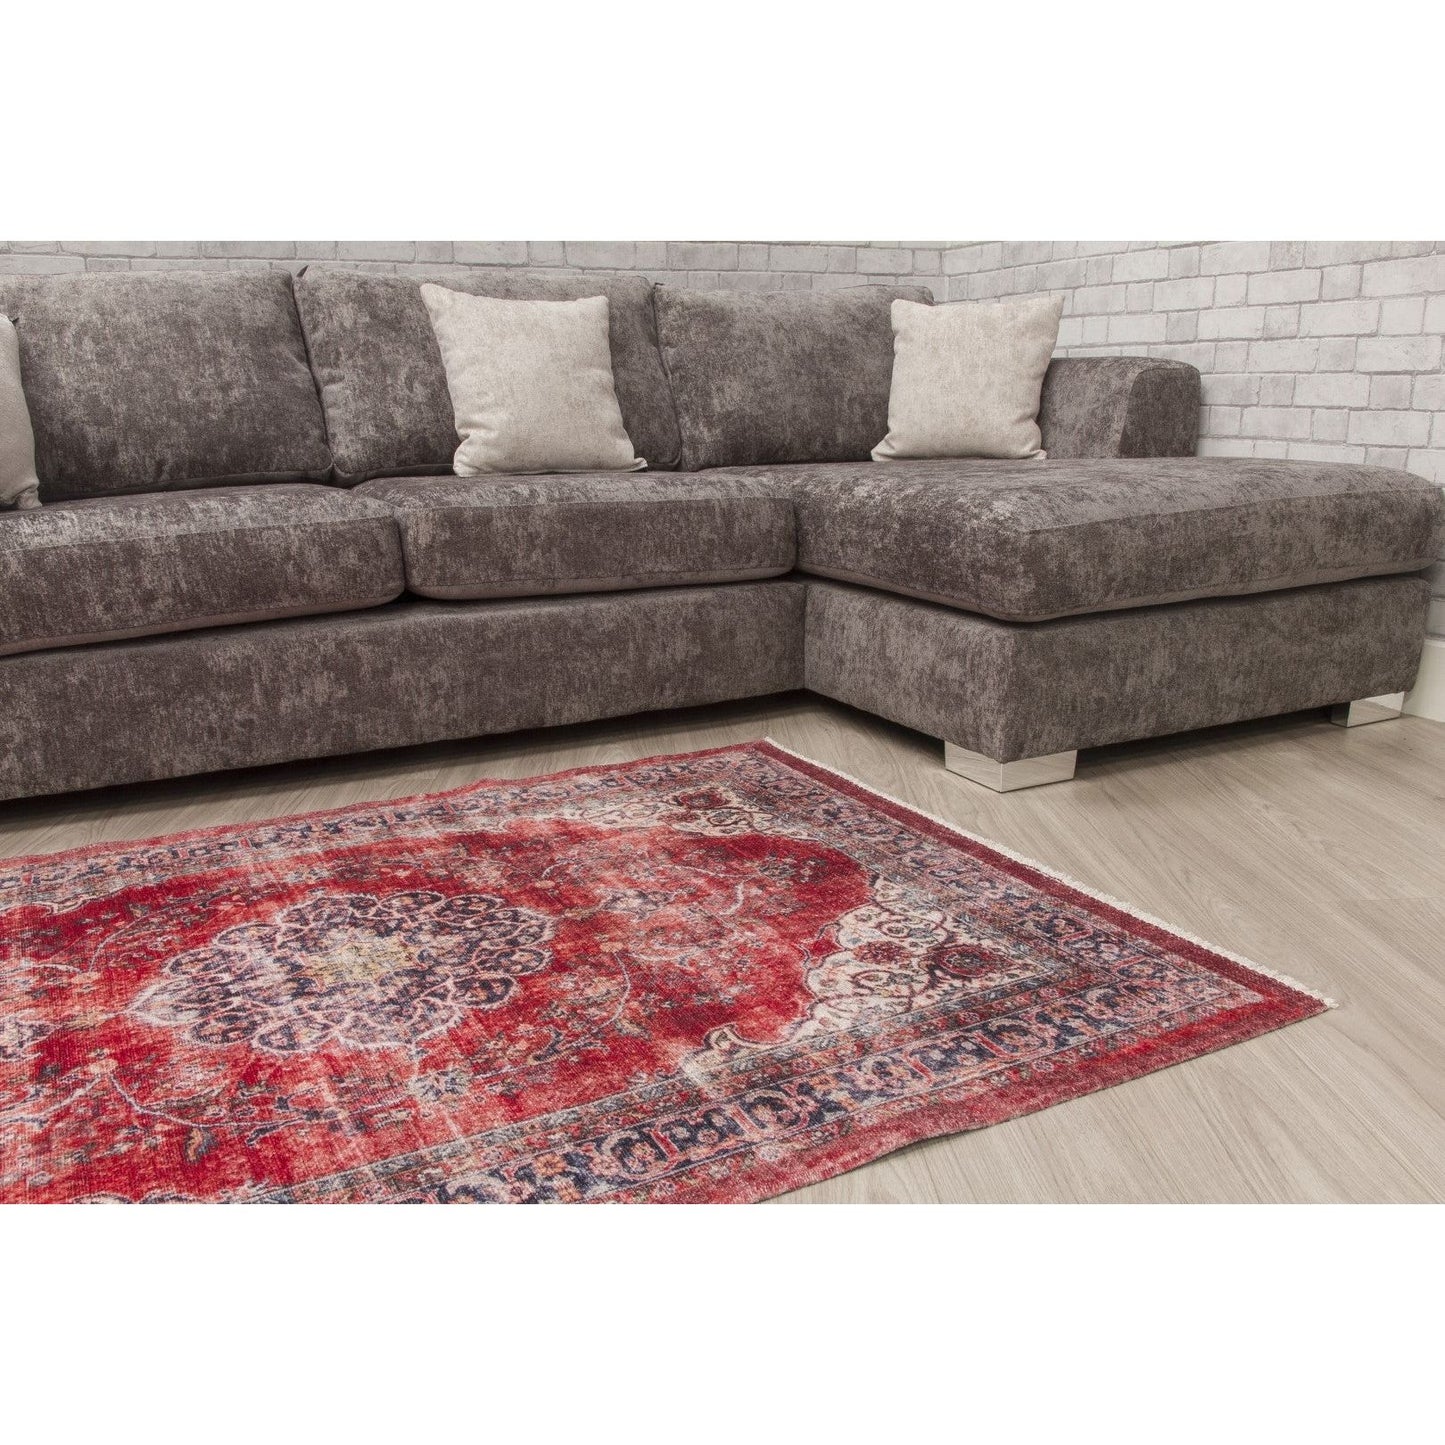 Red Distressed Modern Rug - Modena Rosso